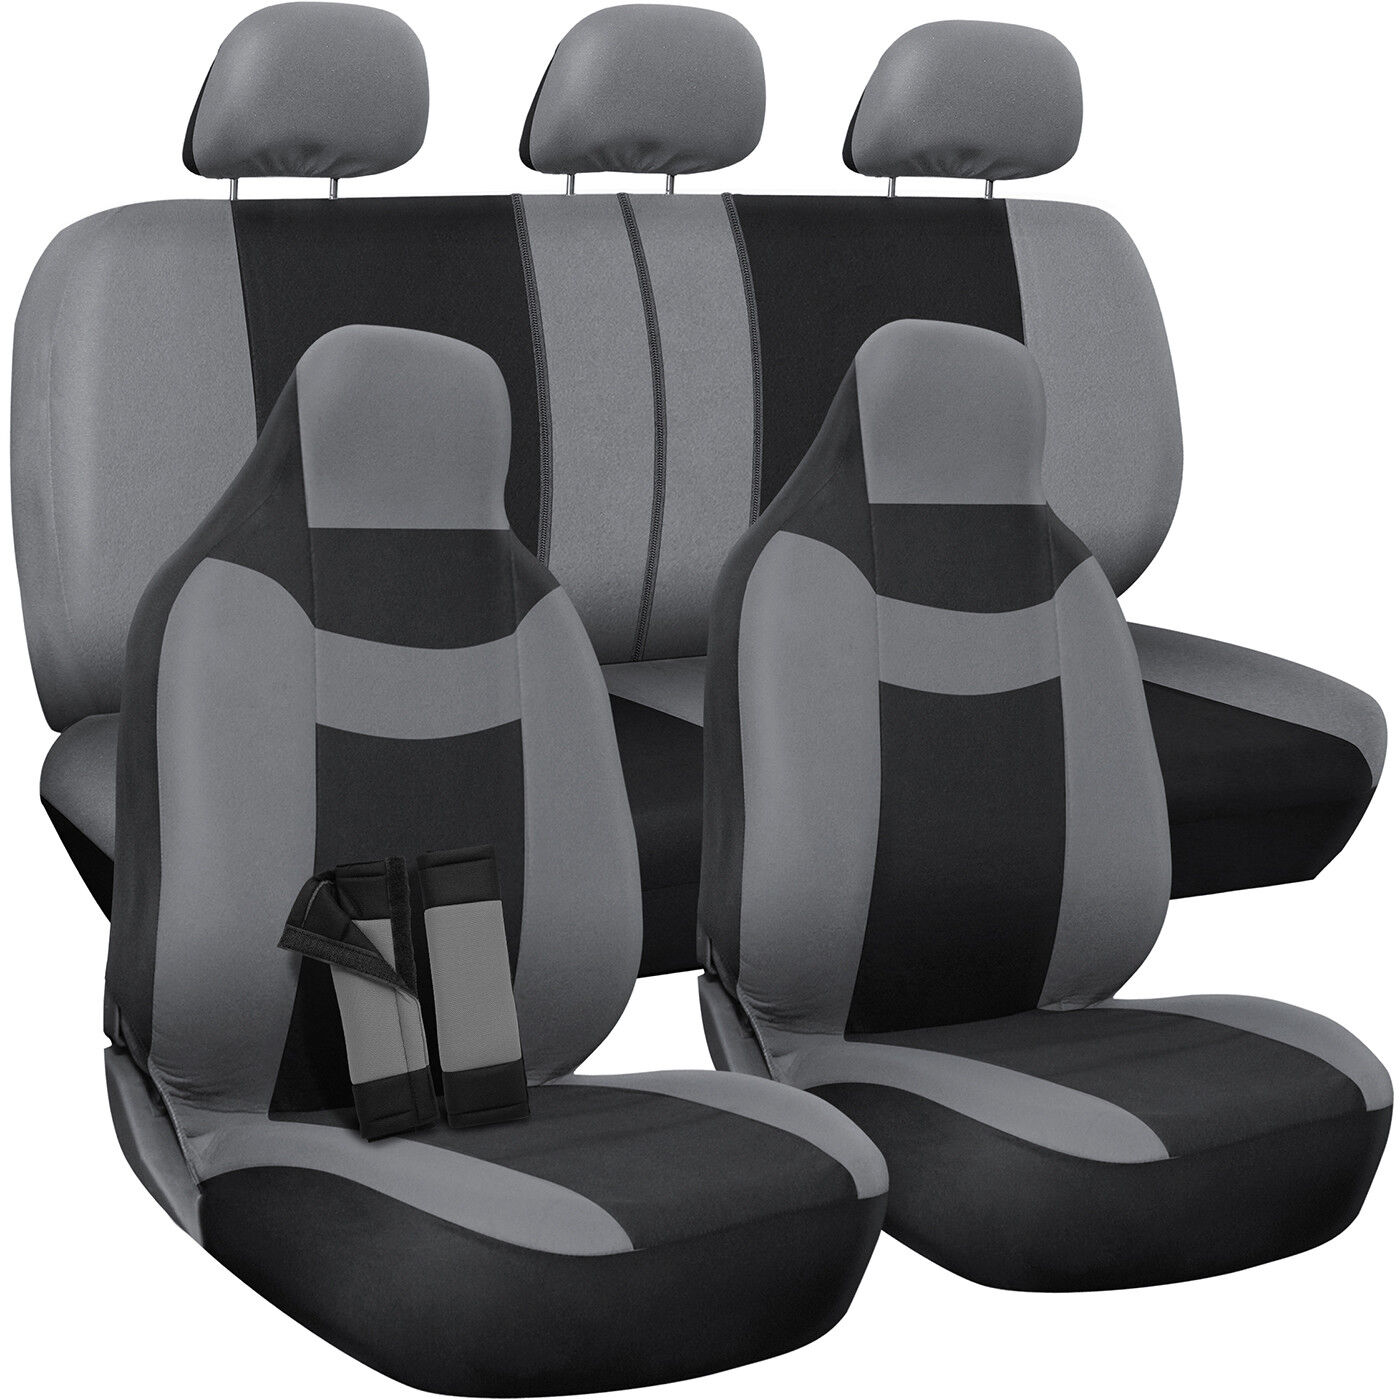 Seat Cover Complete Set for Car Truck SUV Van - Flat Poly Cloth Fabric- 10 Piece